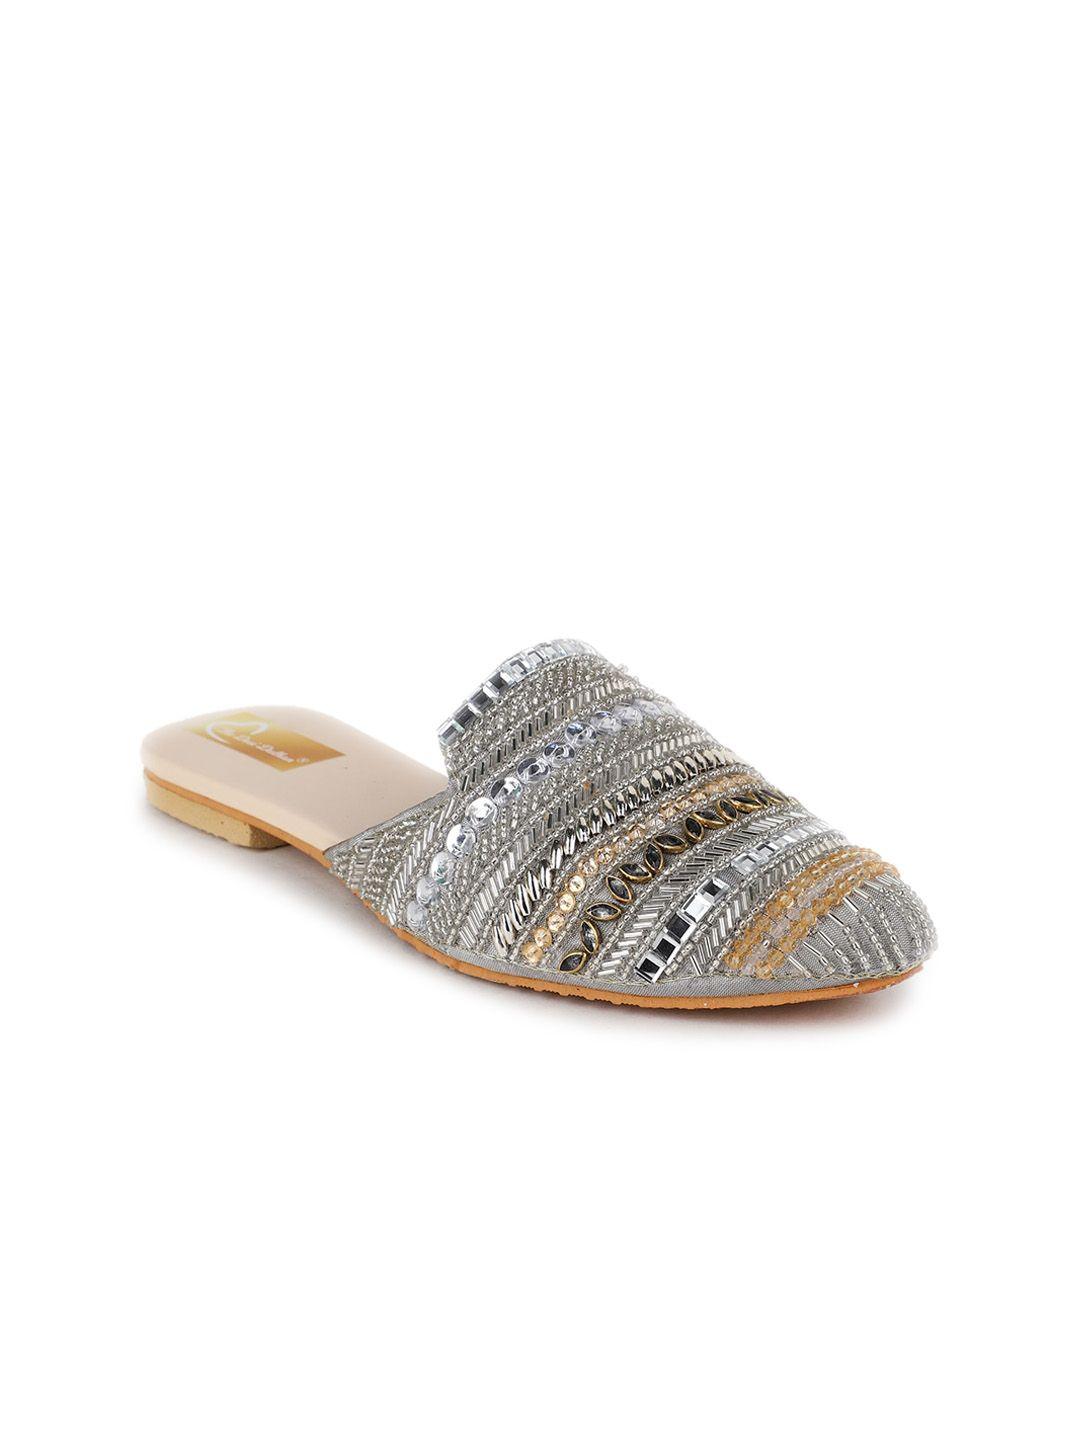 the desi dulhan women textured ethnic mules